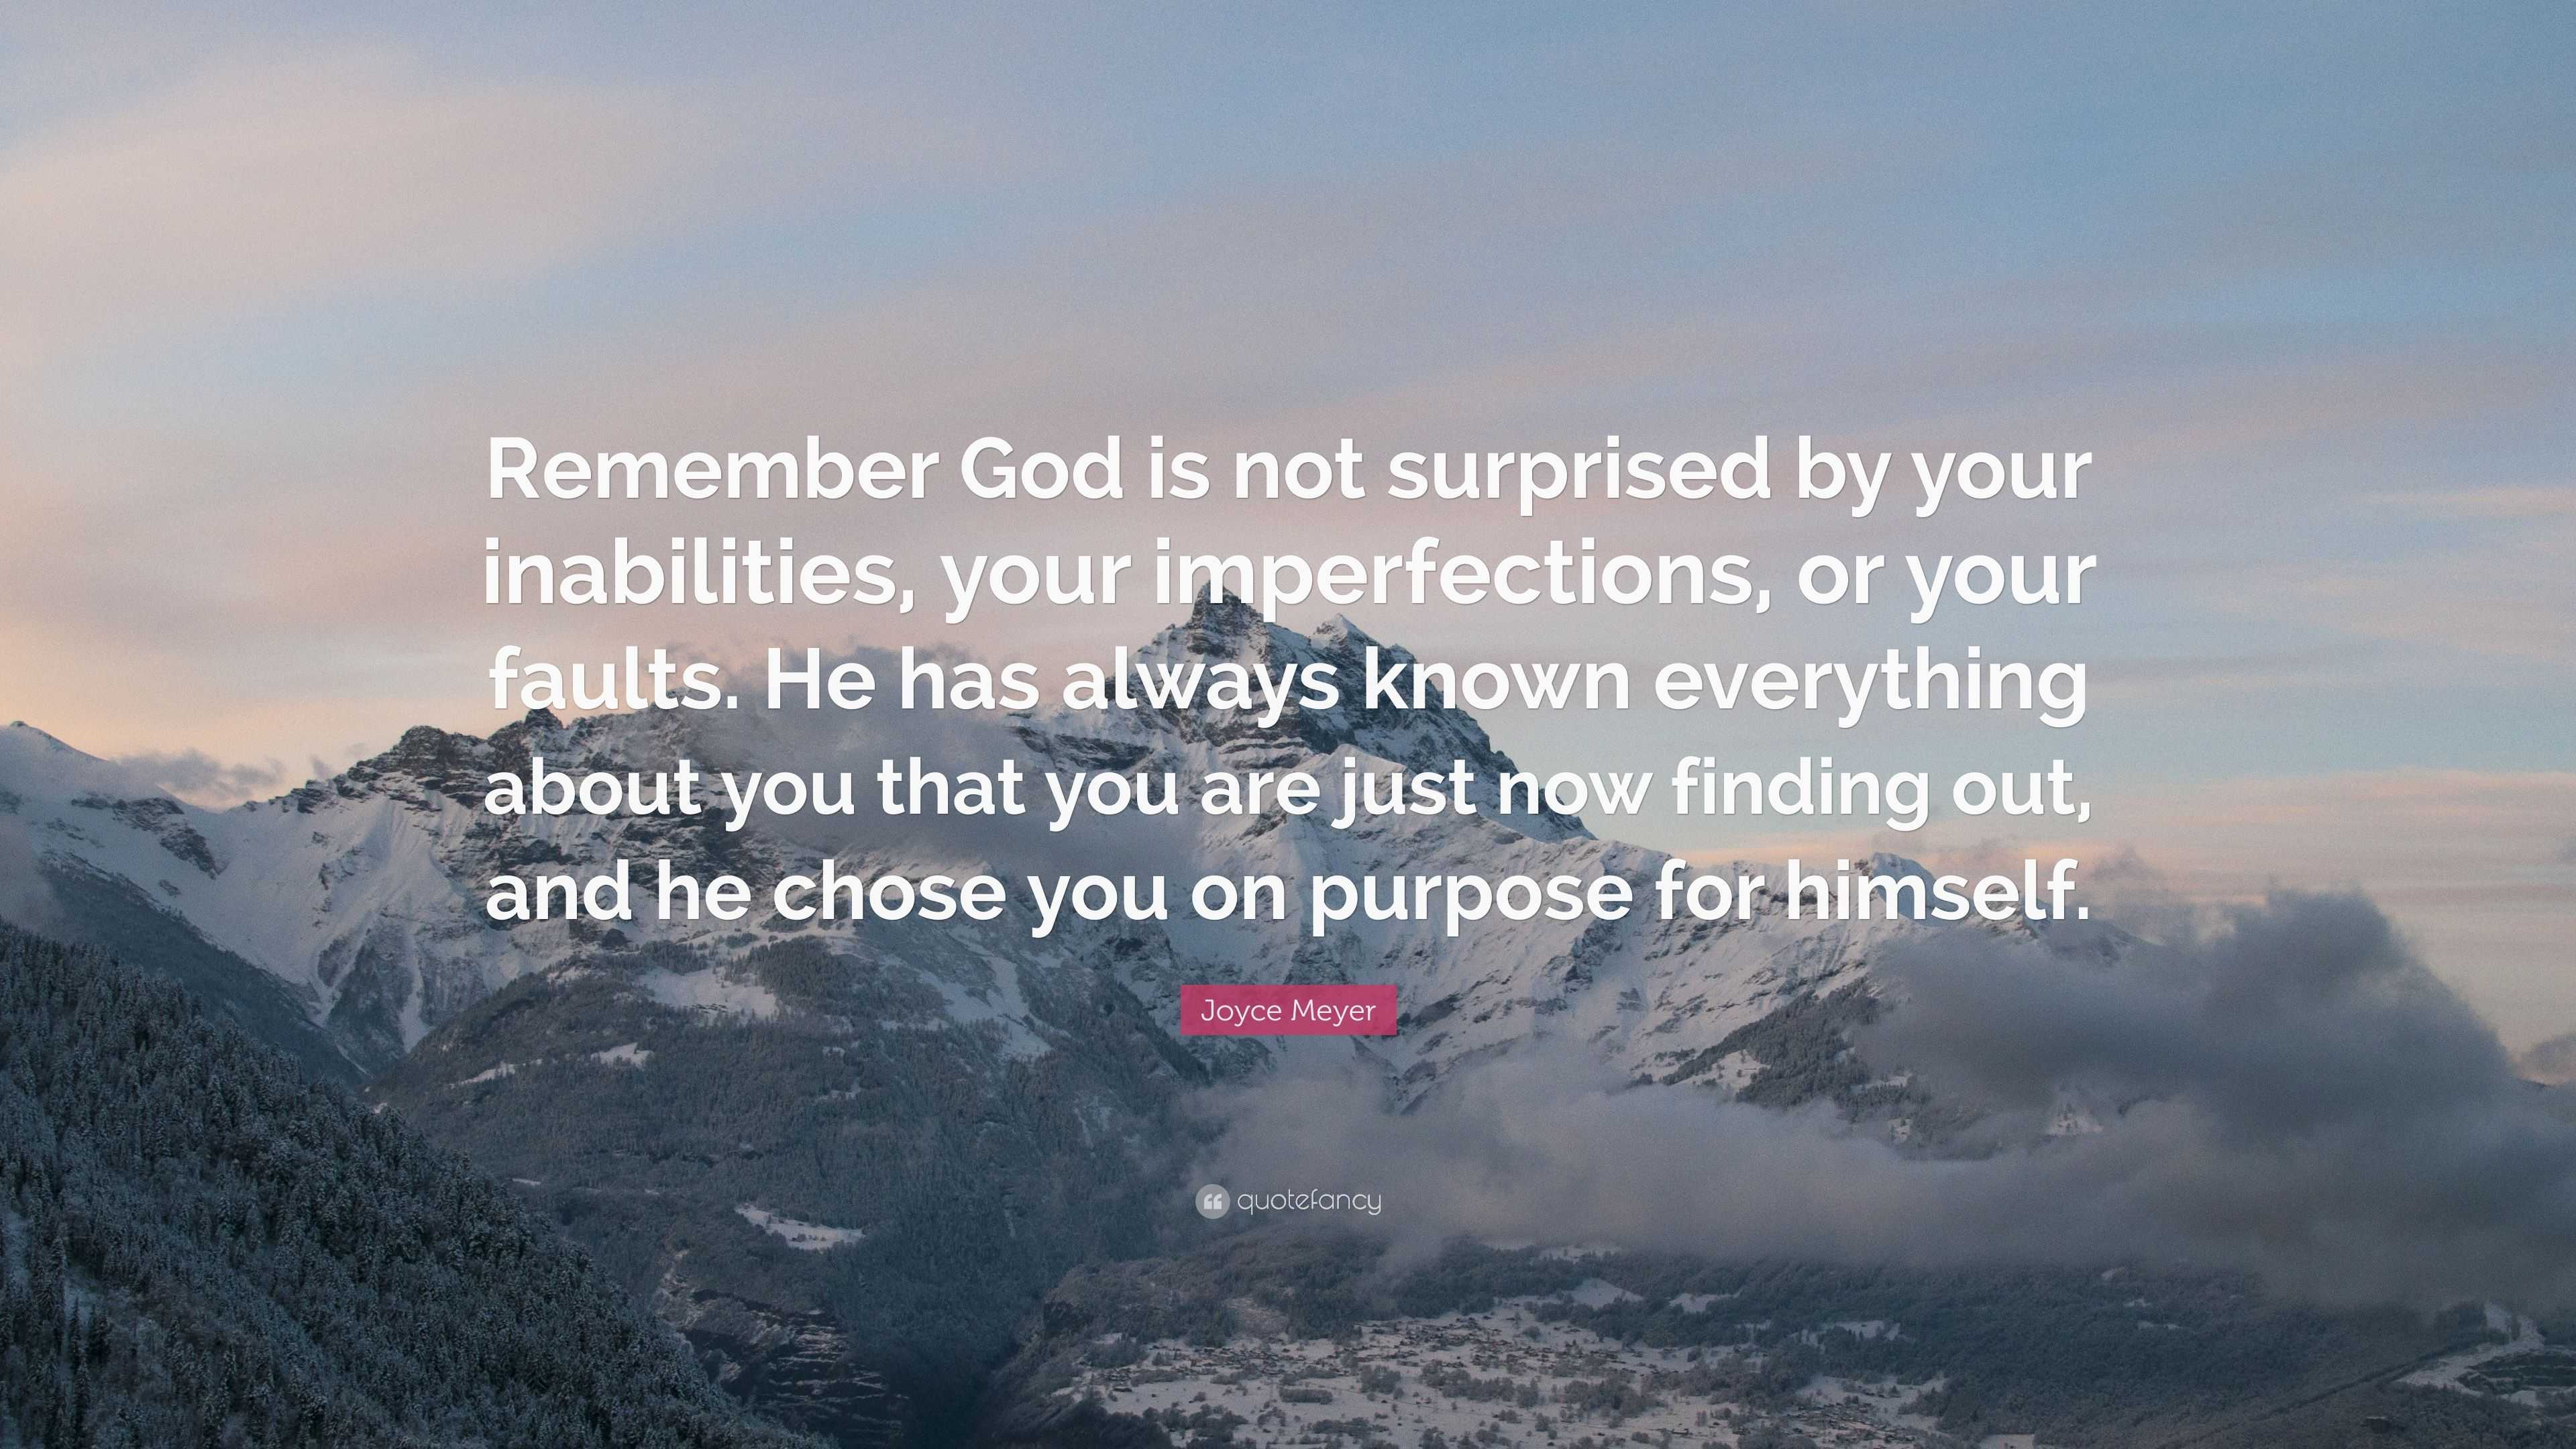 Joyce Meyer Quote “remember God Is Not Surprised By Your Inabilities